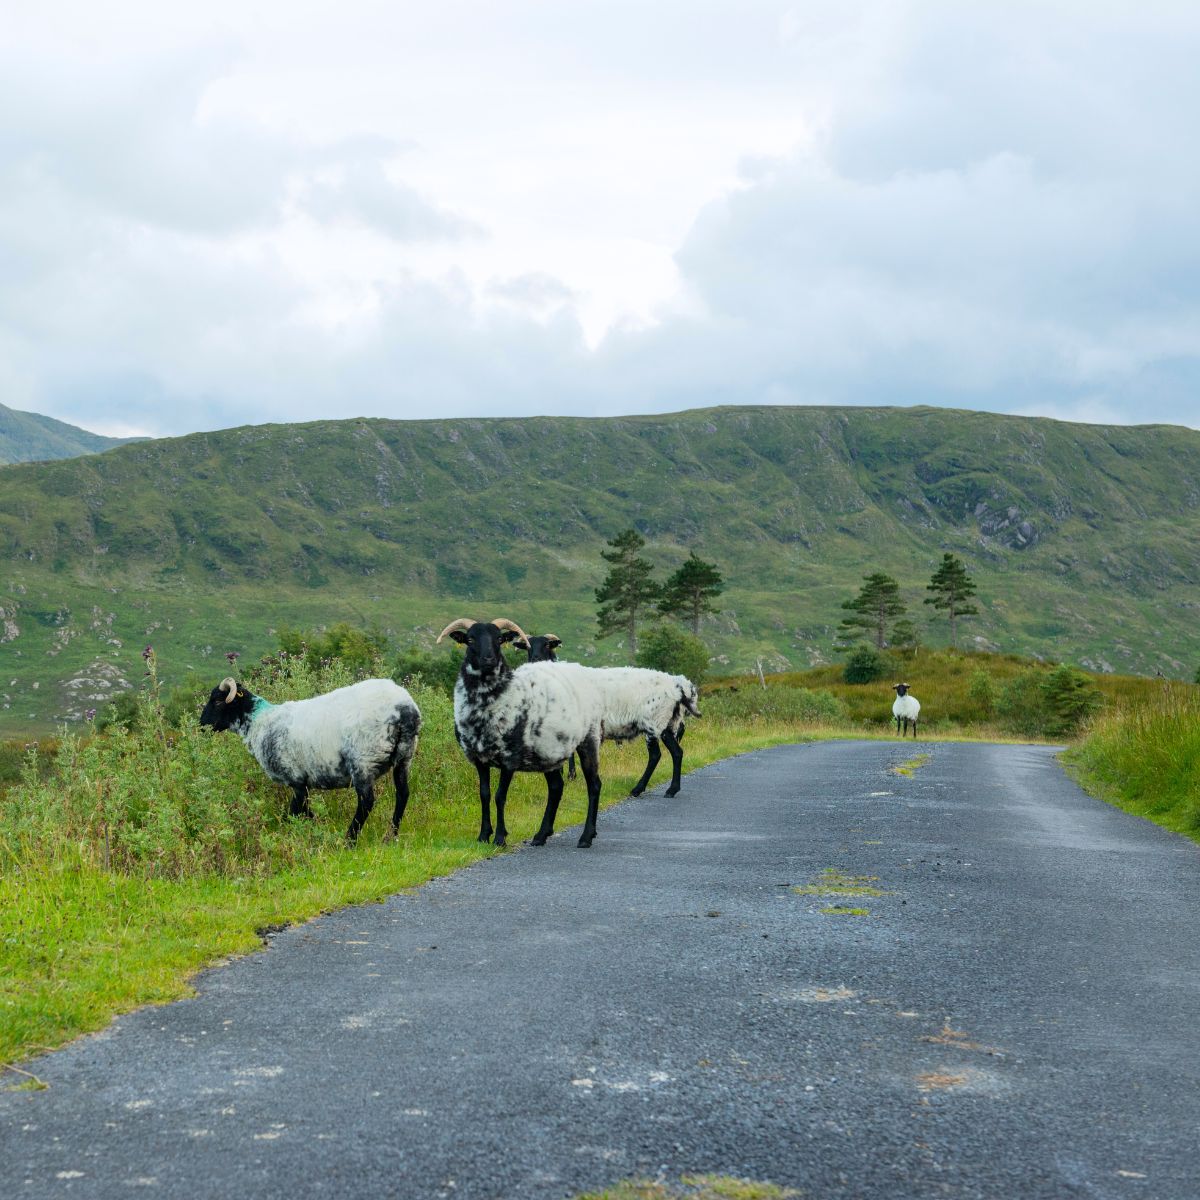 A group of sheep gather on a narrow road